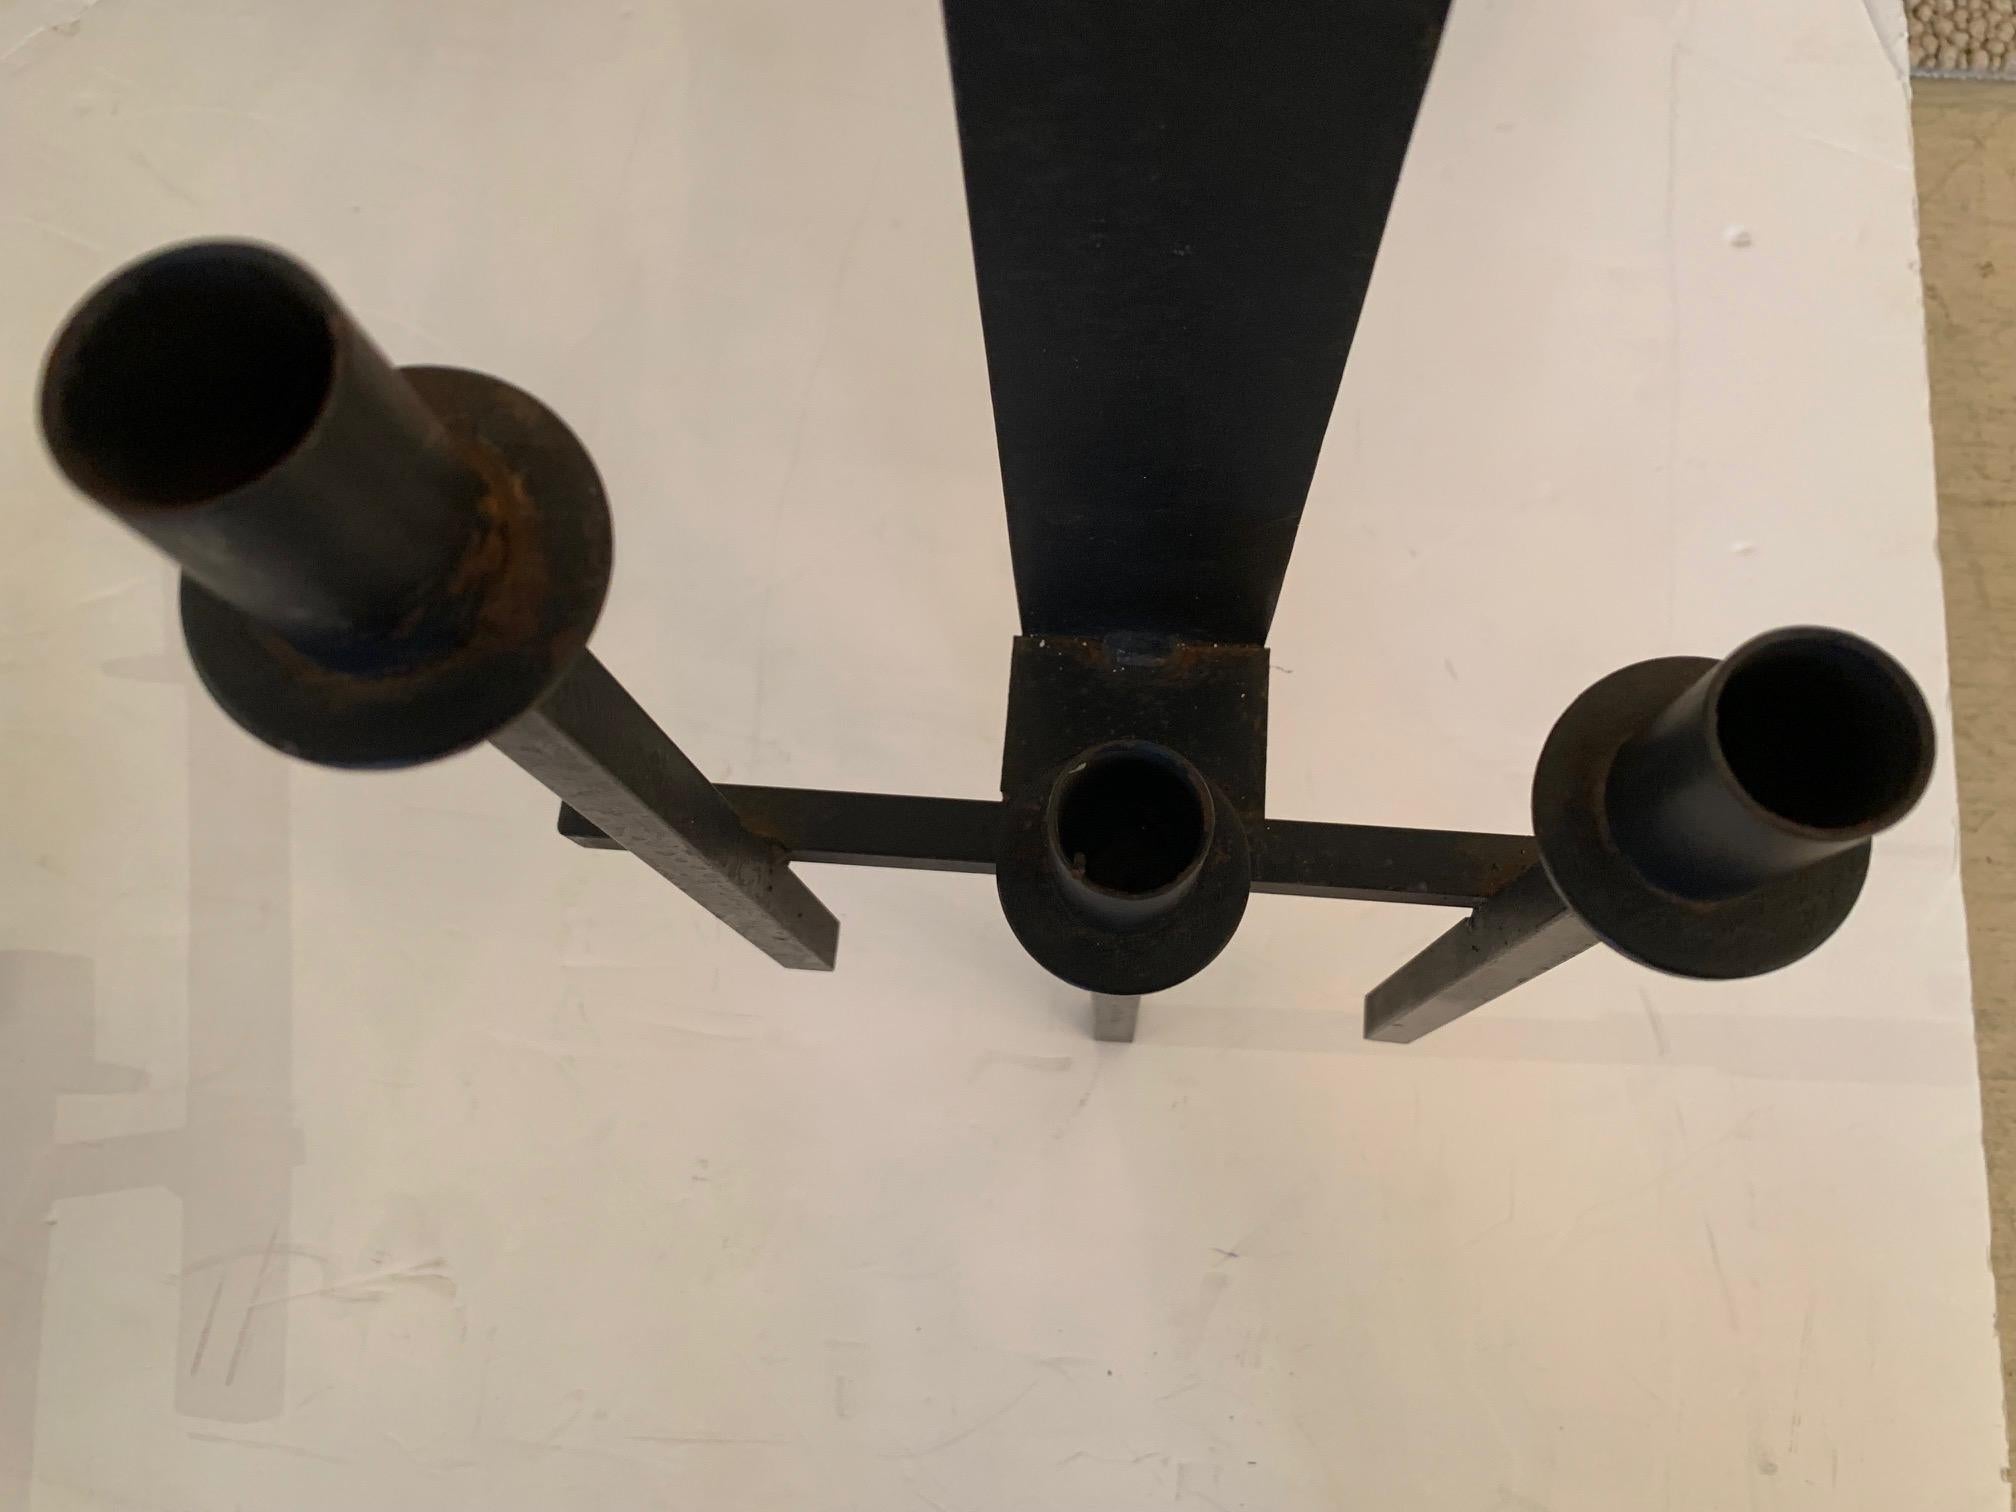 Pair of Mid-Century Modern black iron Frank Lloyd Wright style candle sconces having 3 arms in each.